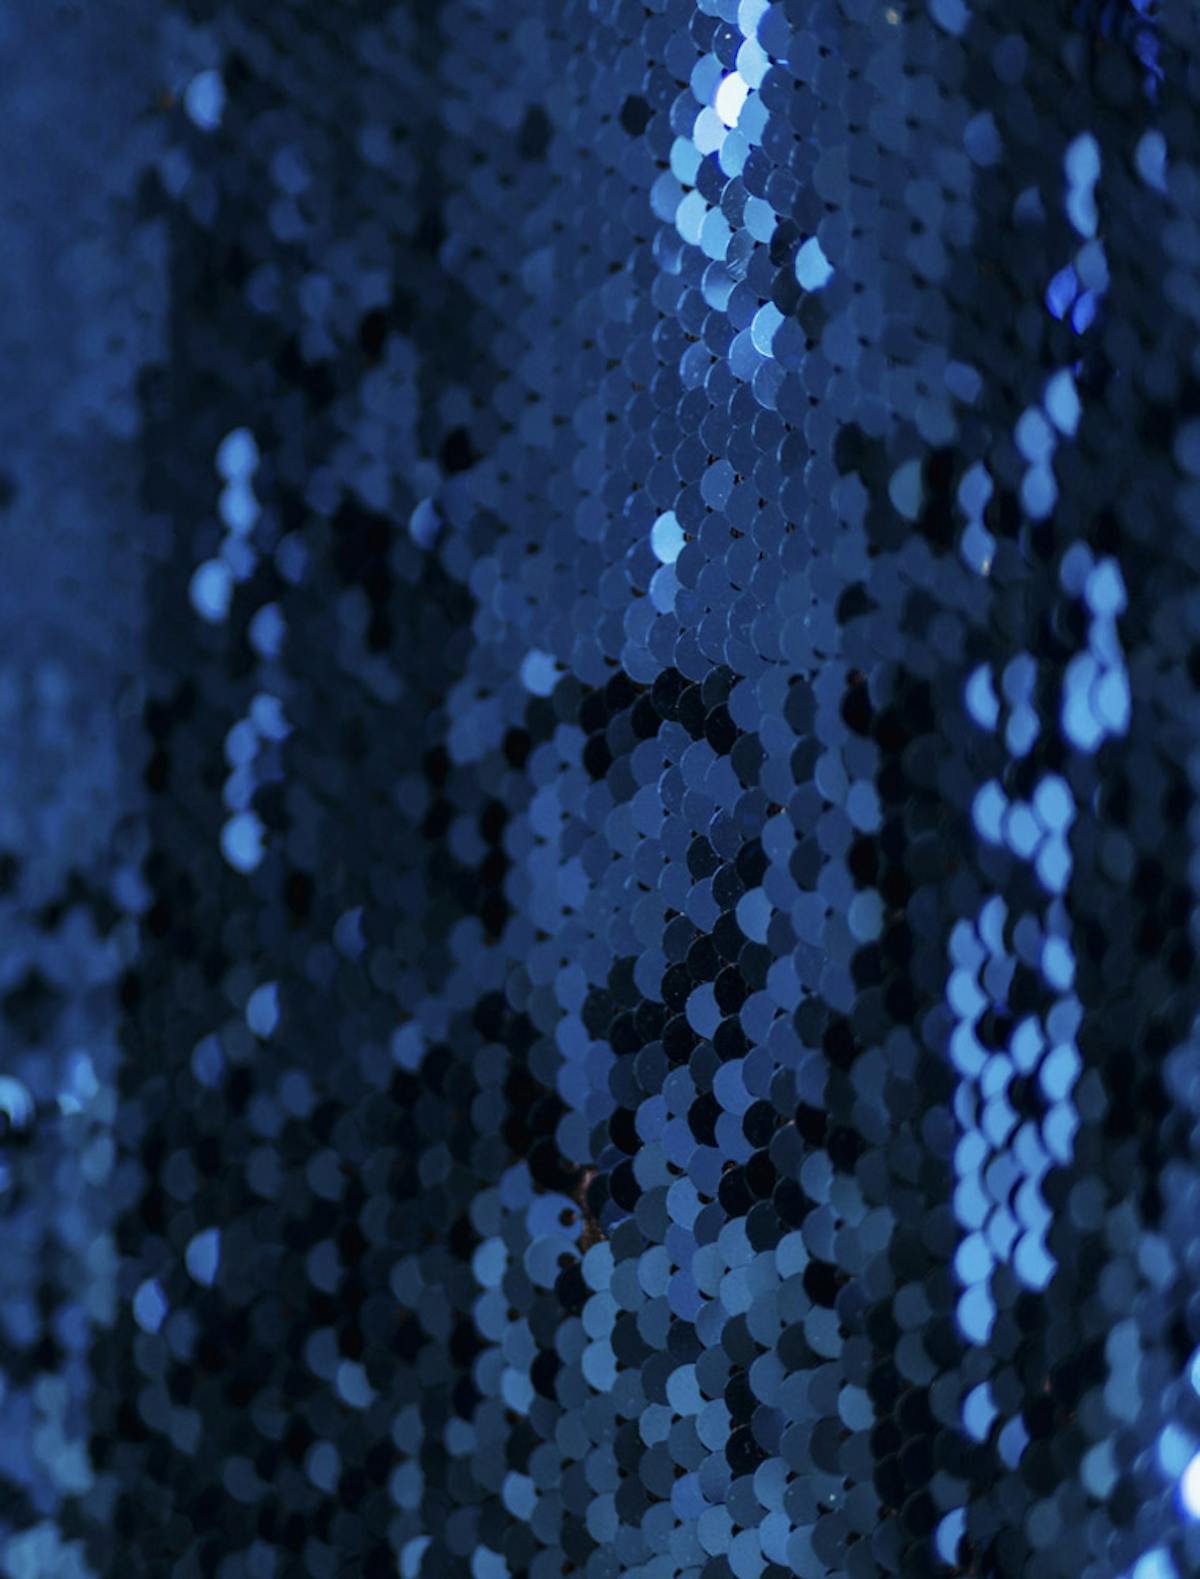  Close up photograph of navy blue sequin fabric